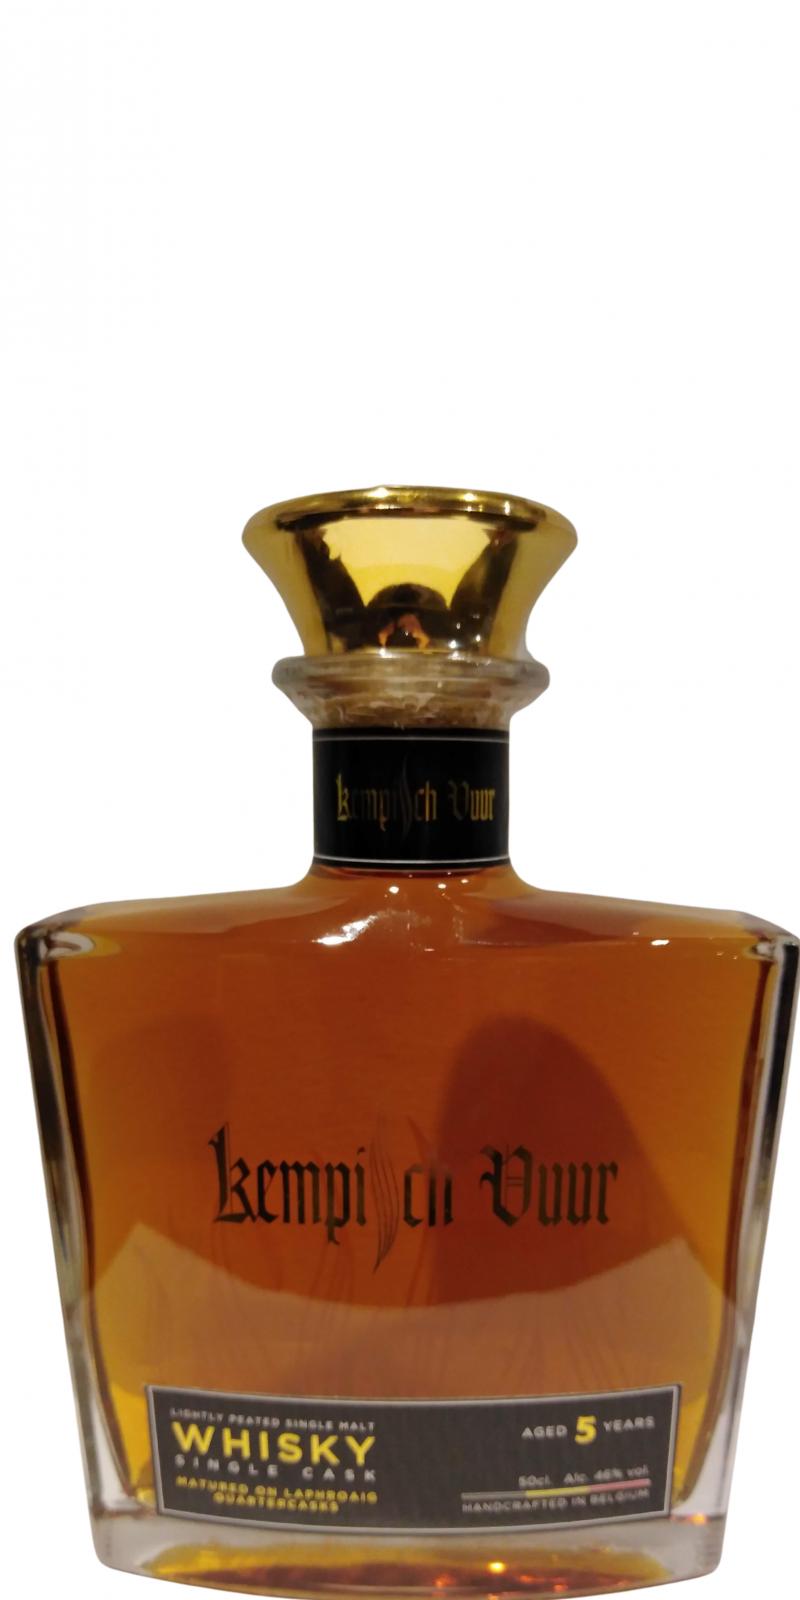 Kempisch Vuur 05-year-old